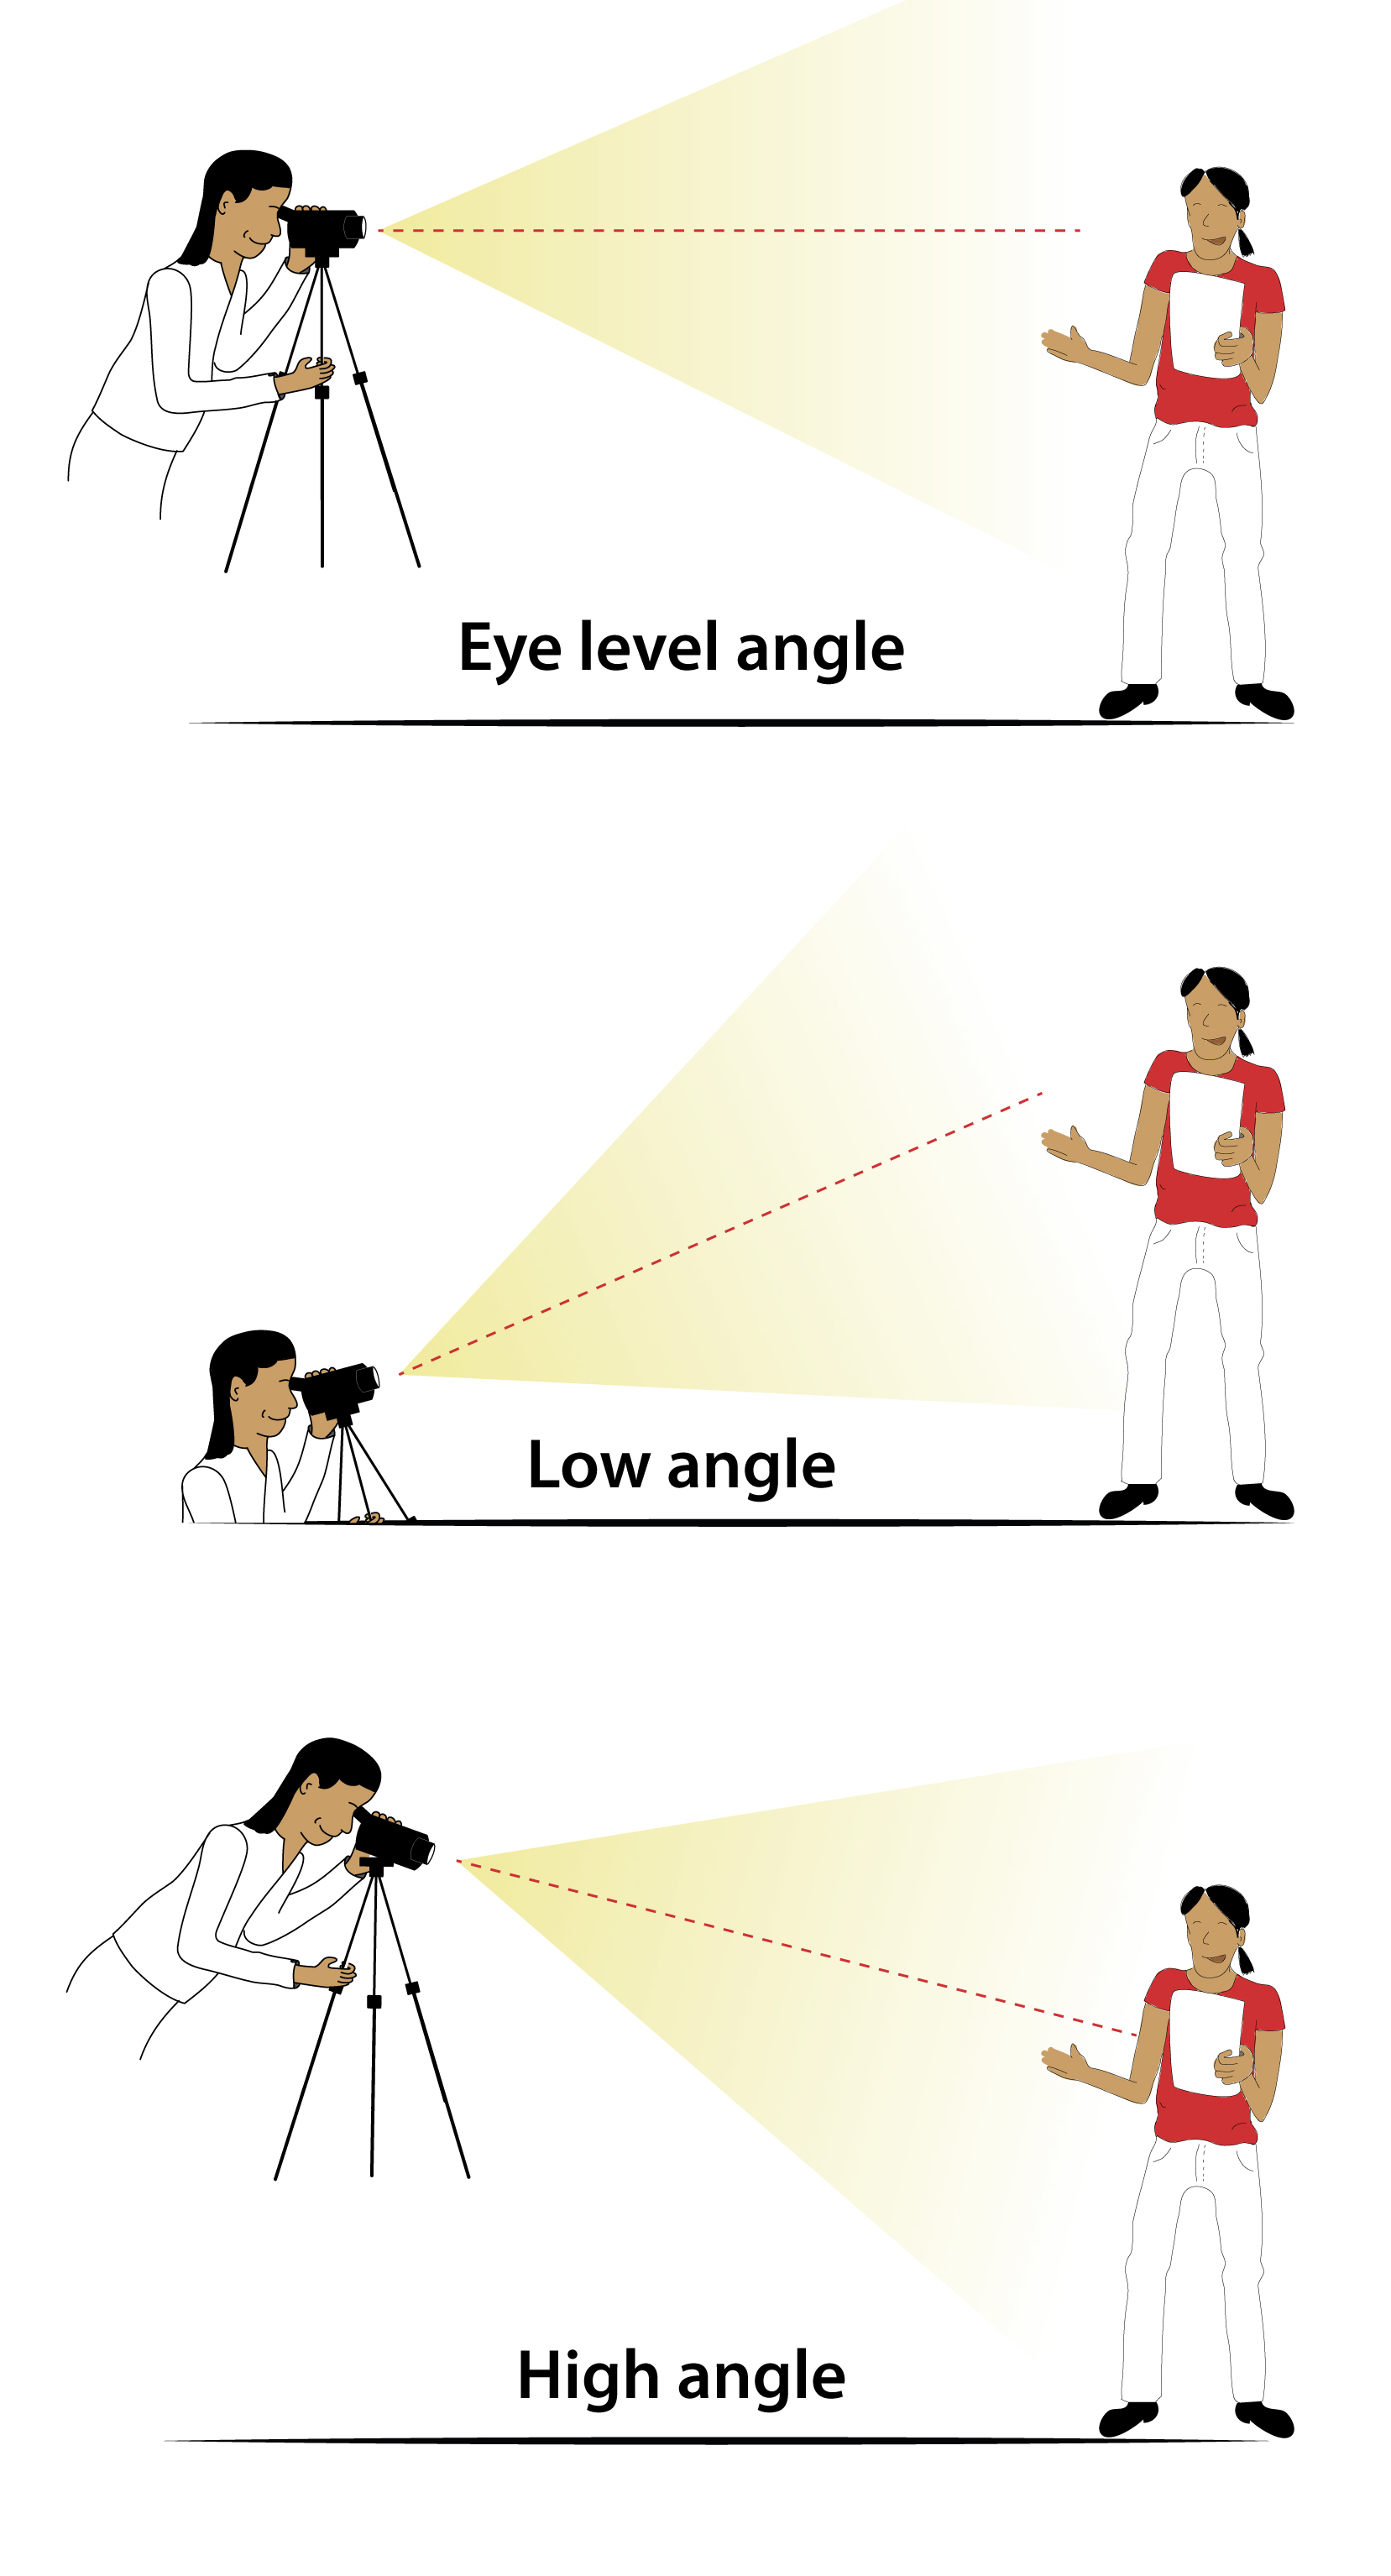 Illustration of a person interviewing someone at eye level, low and high angle